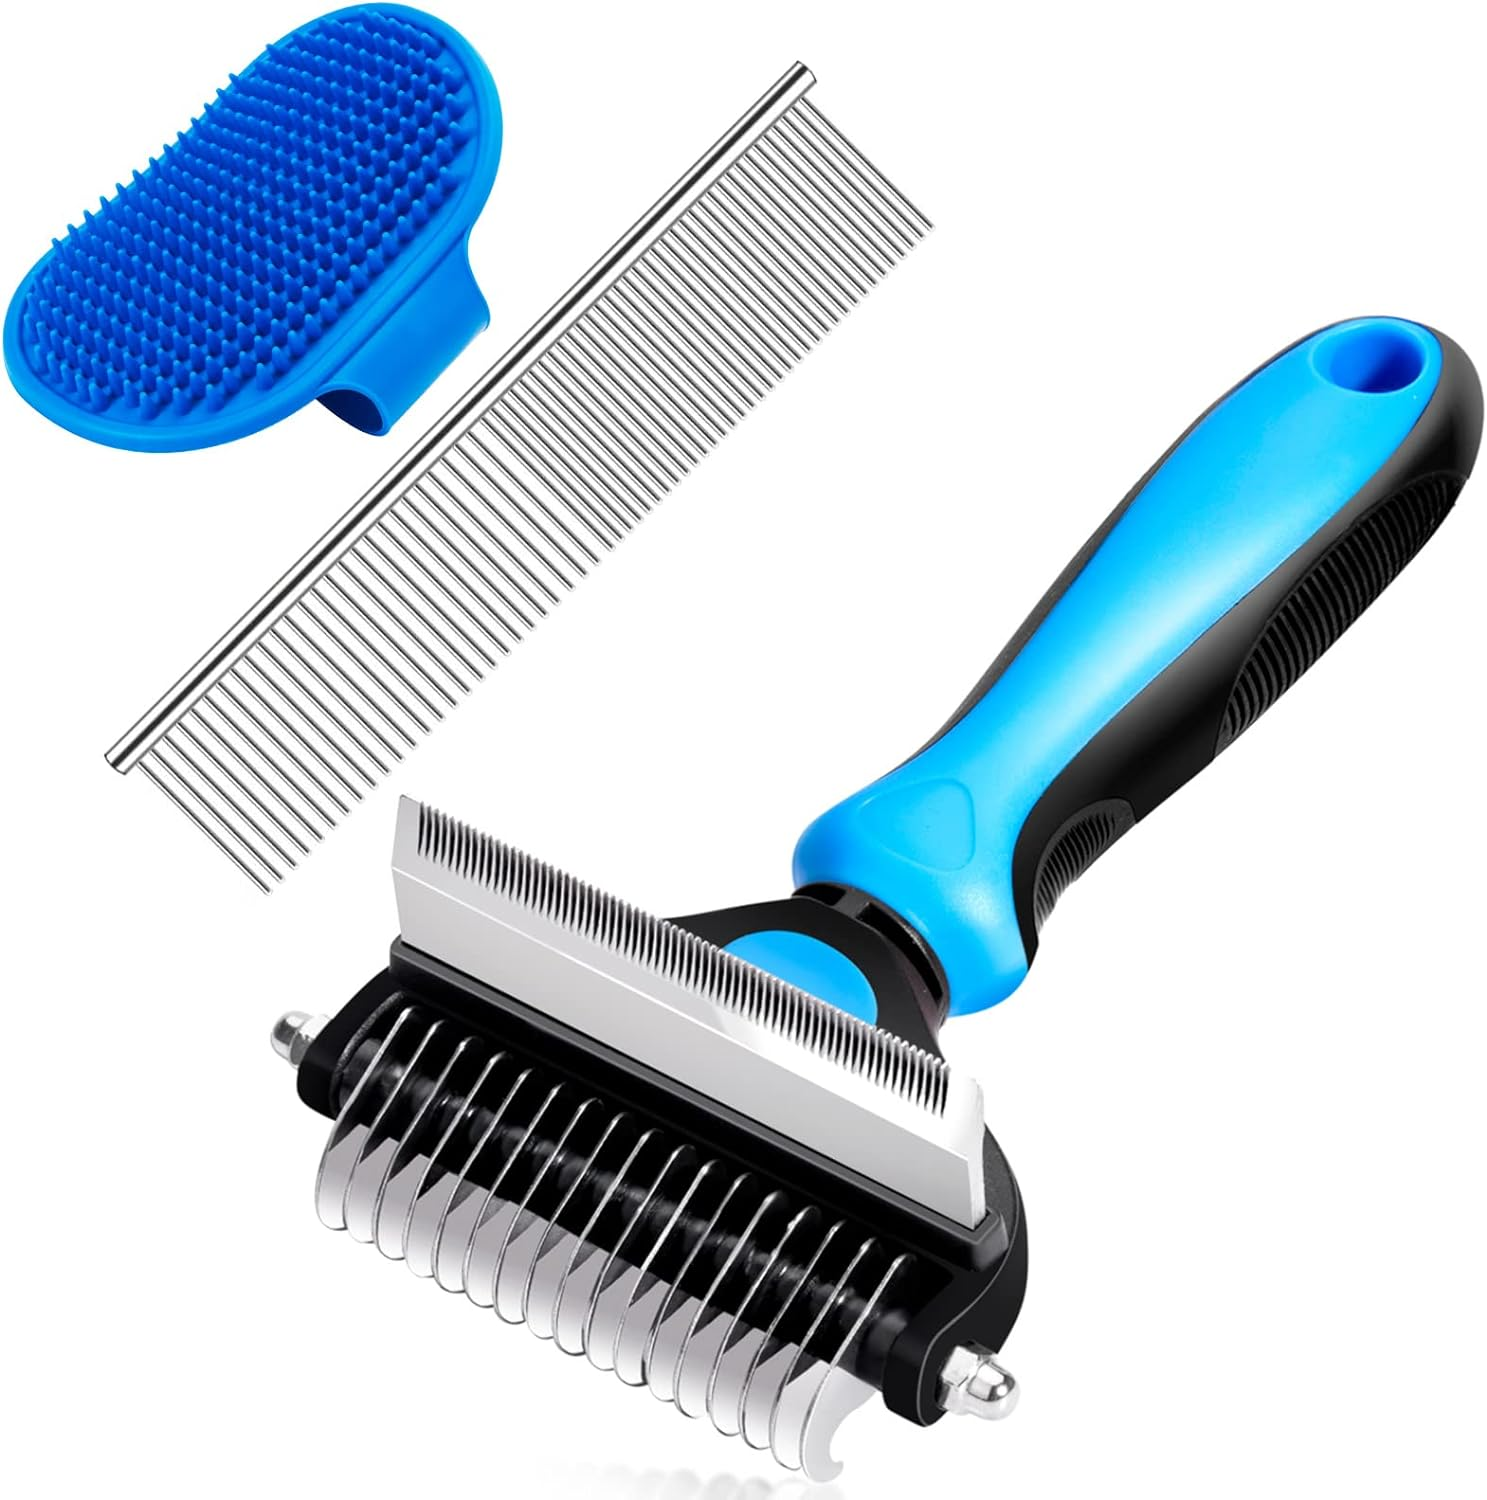 CGBE Dog Grooming Brush, 2 in 1 Dog Undercoat Rake for Small Dogs and Cats Shedding, Safe Dematting Comb Deshedding Tool for Pet Matted Hair (Small Blue)